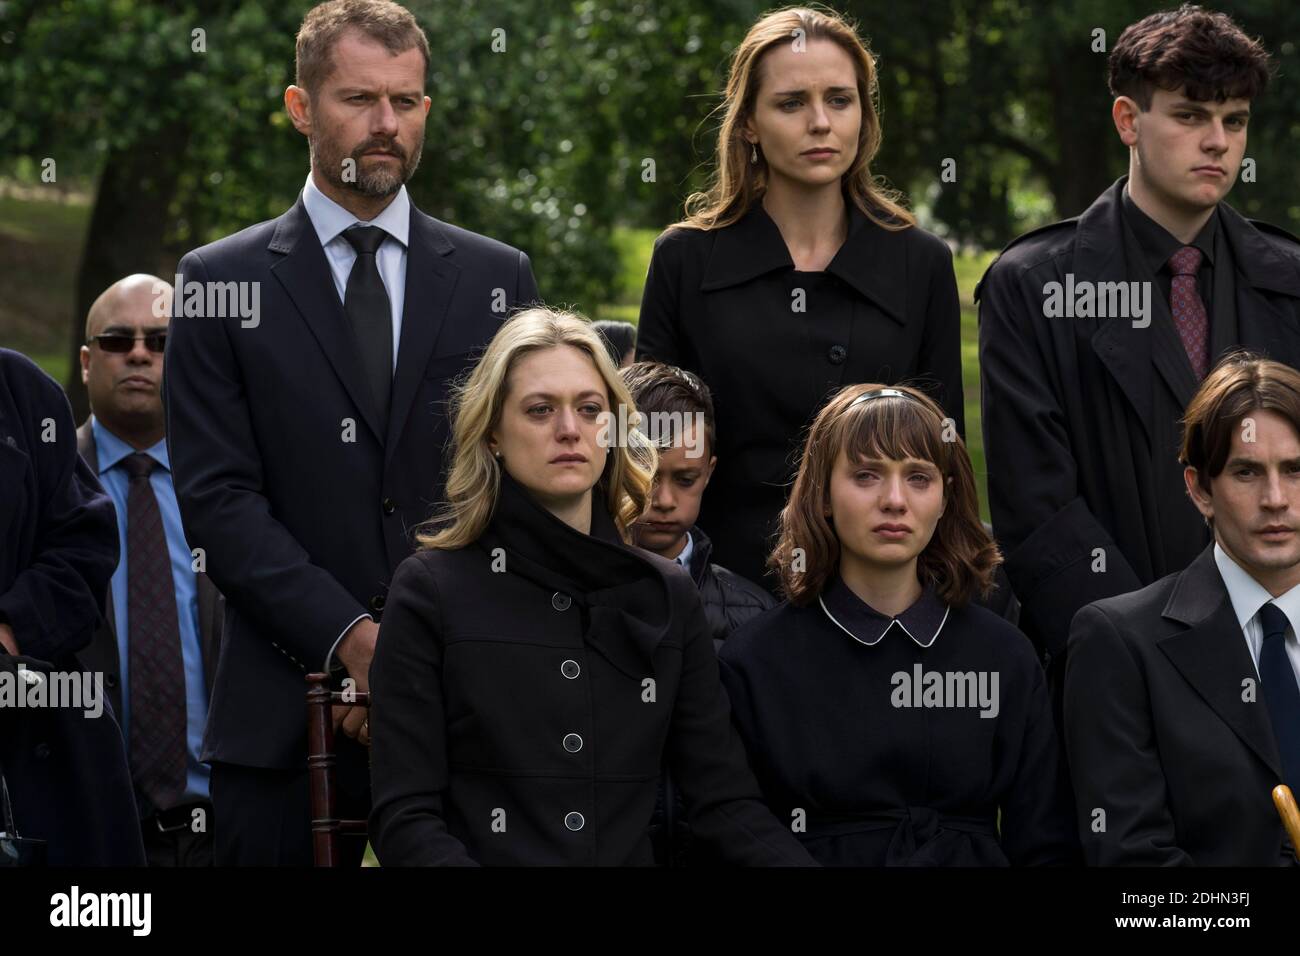 RELEASE DATE: October 23, 2020 TITLE: The Empty Man STUDIO: Walt Disney DIRECTOR: David Prior PLOT: On the trail of a missing girl, an ex-cop comes across a secretive group attempting to summon a terrifying supernatural entity. STARRING: (L-R): James Badge Dale, Tanya van Graan (sitting l-r): Marin Ireland, Sasha Frolova. (Credit Image: © Walt Disney/Entertainment Pictures) Stock Photo